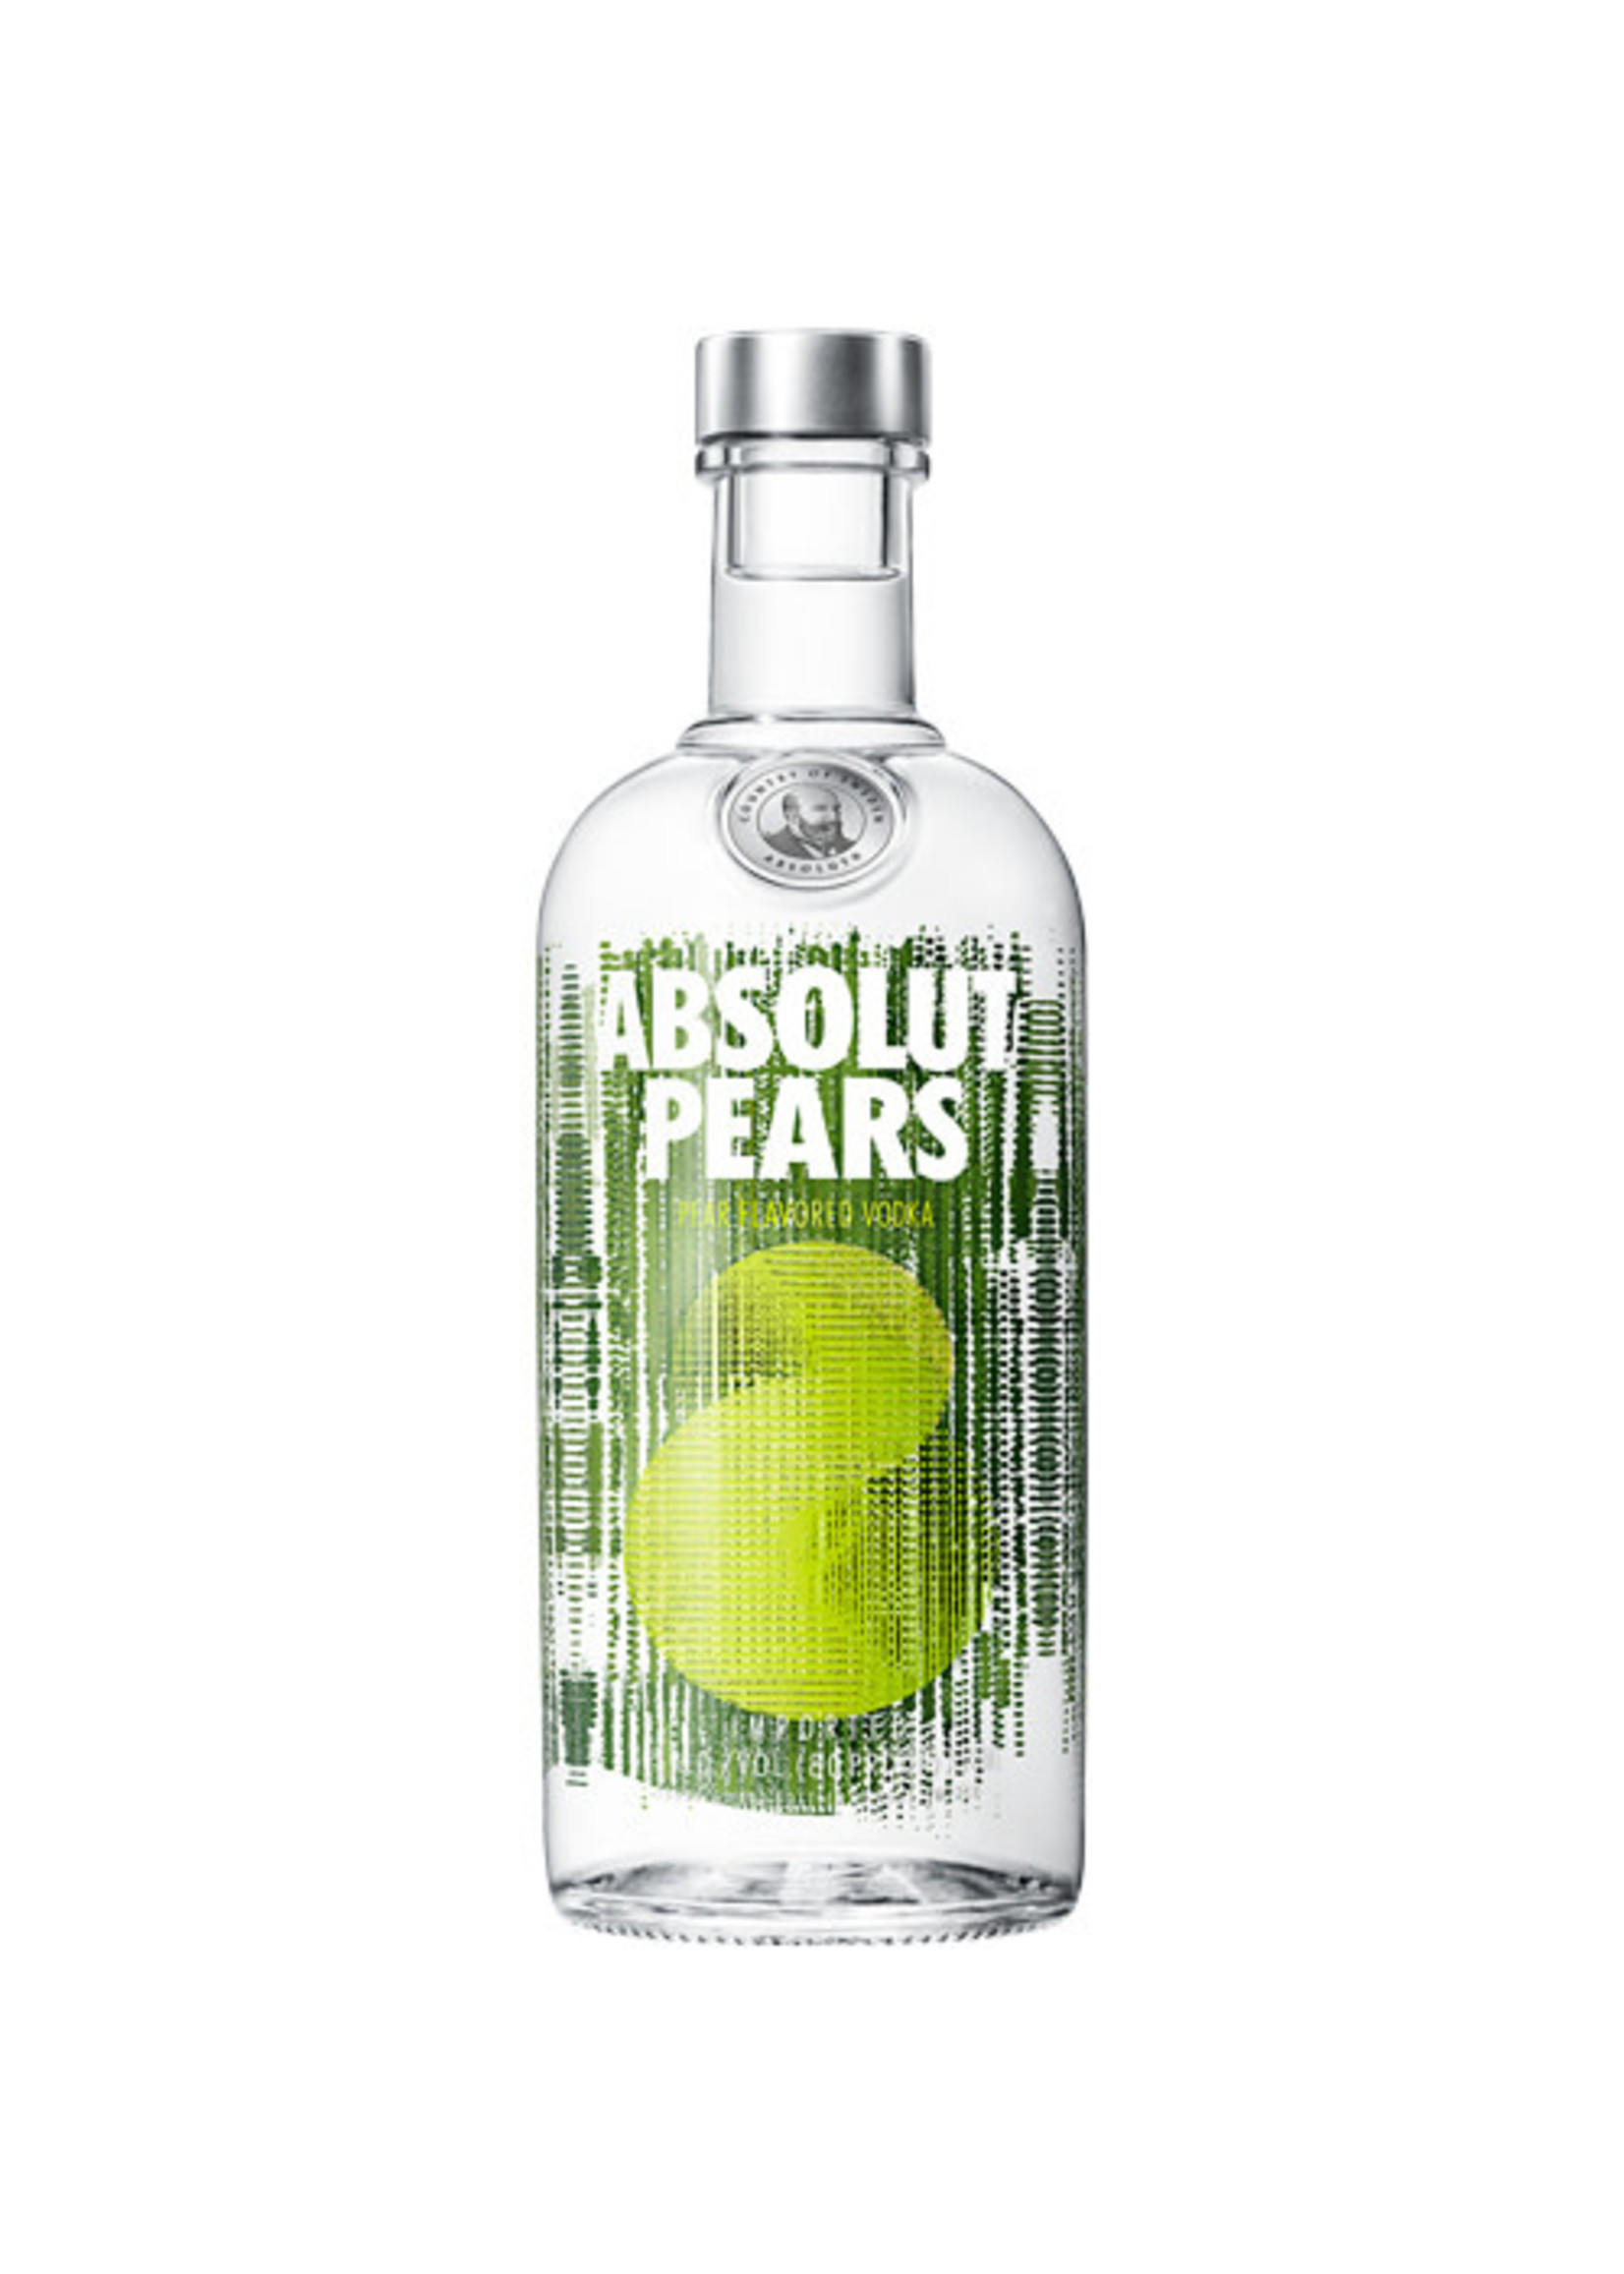 ABSOLUT ABSOLUT	PEARS	.750L